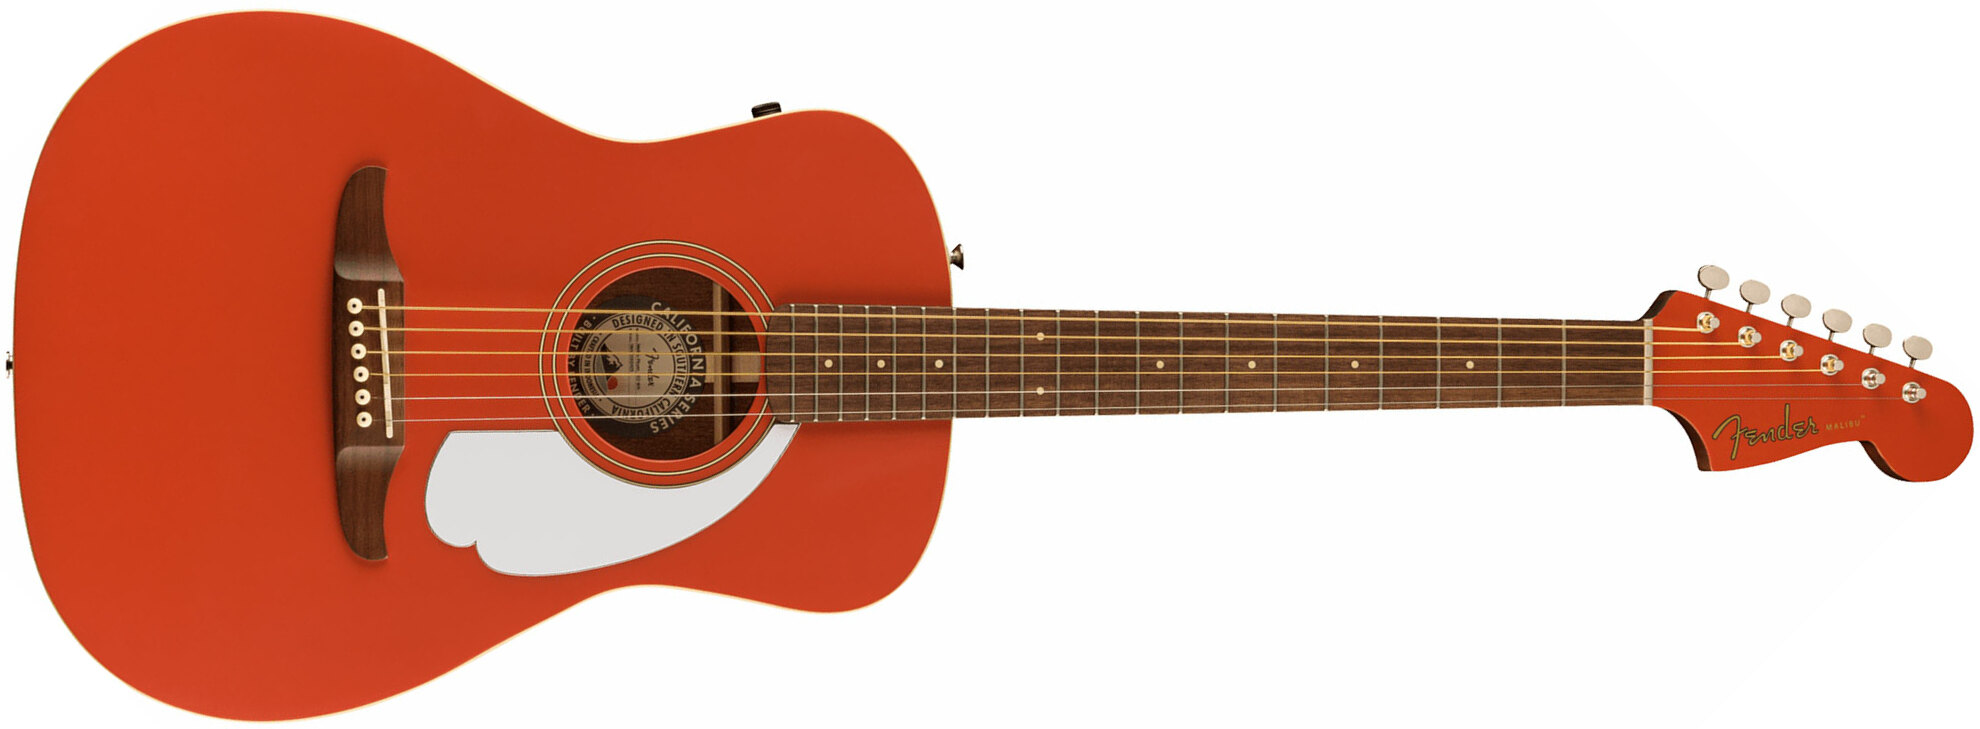 Fender Malibu Player 2023 Parlor Epicea Sapele Wal - Fiesta Red - Guitare Electro Acoustique - Main picture